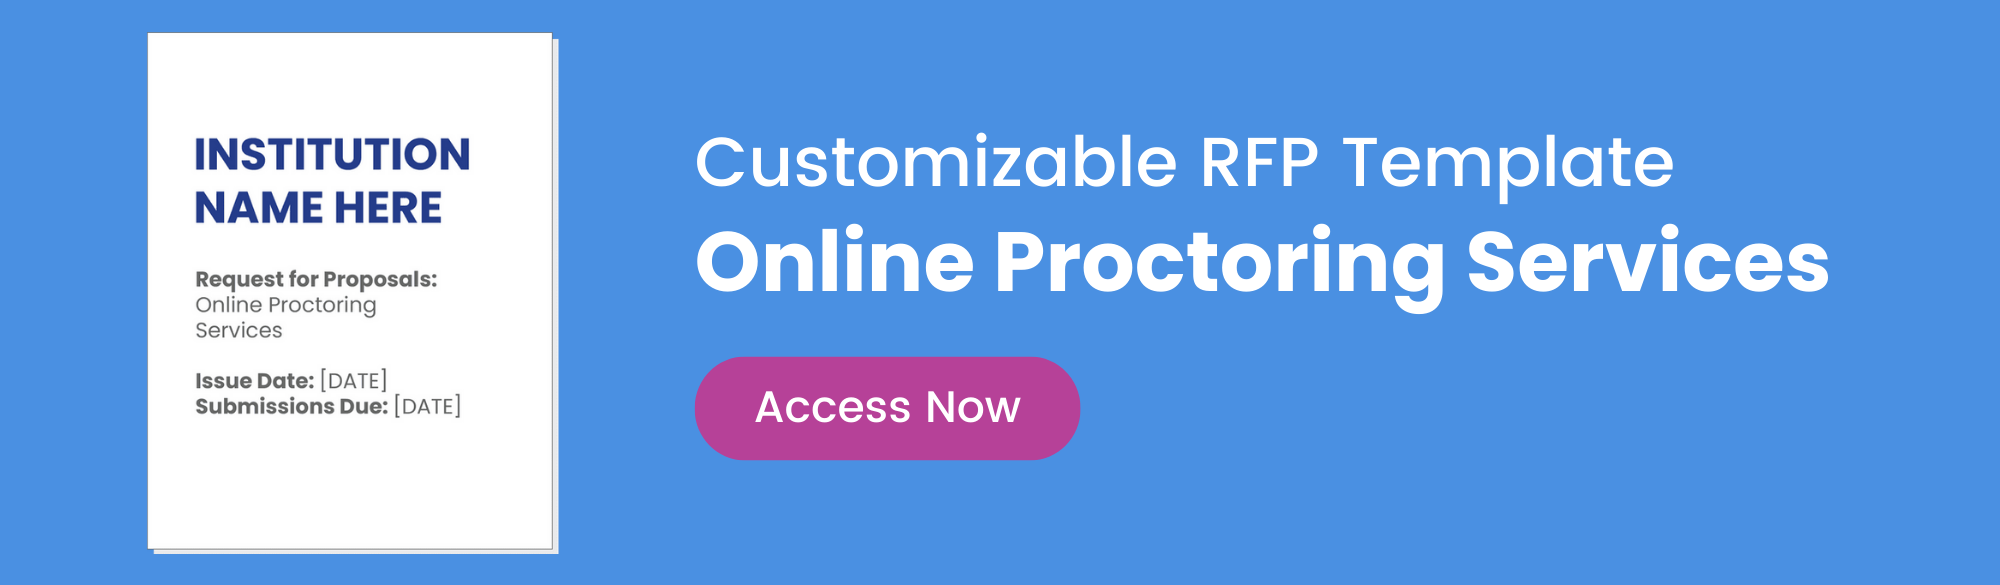 Download a free customizable RFP template for online proctoring